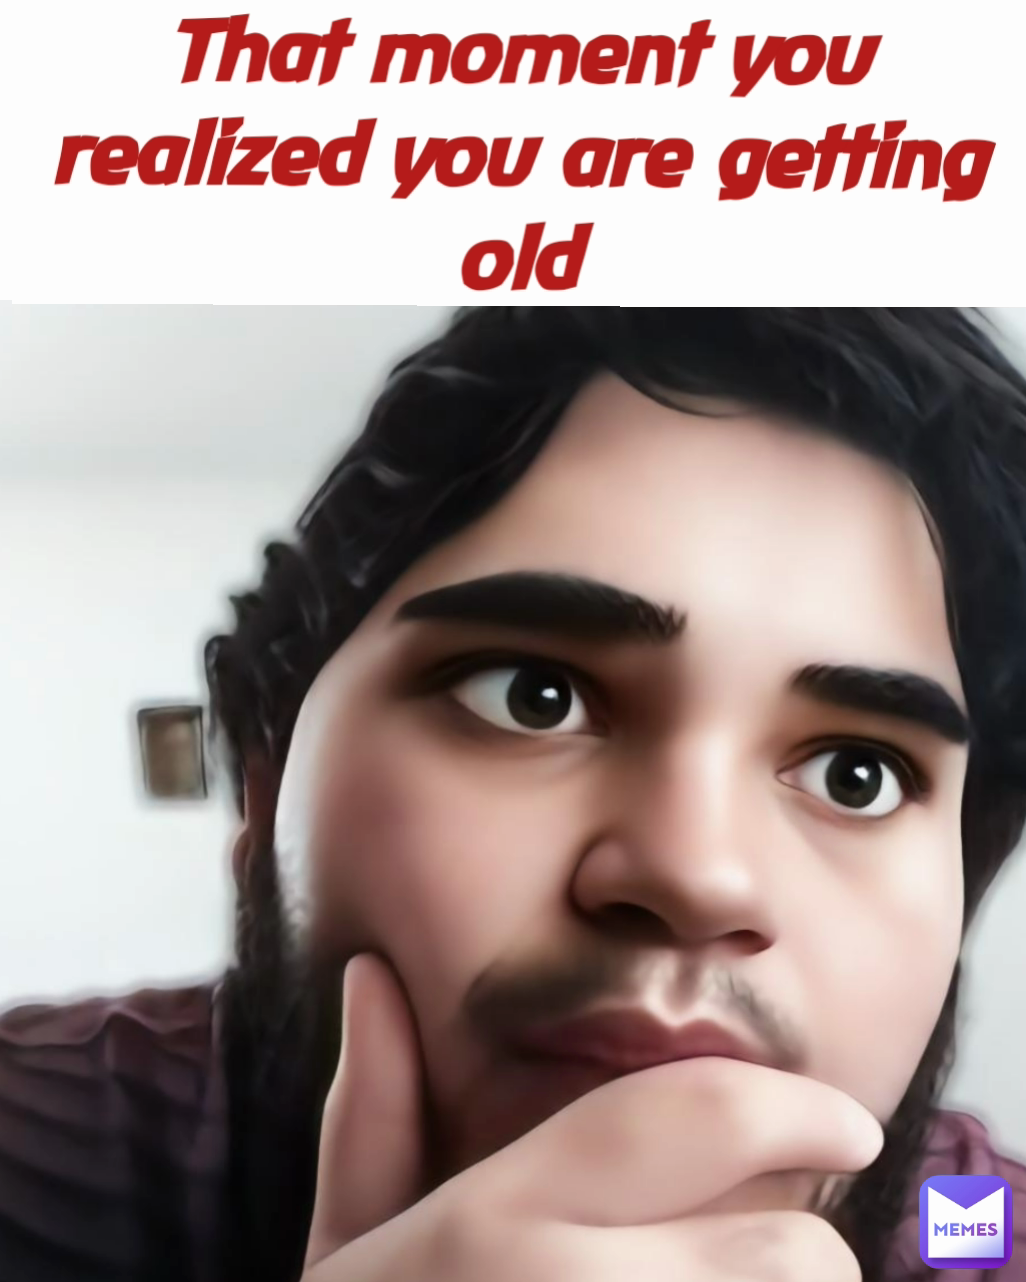 That moment you realized you are getting old